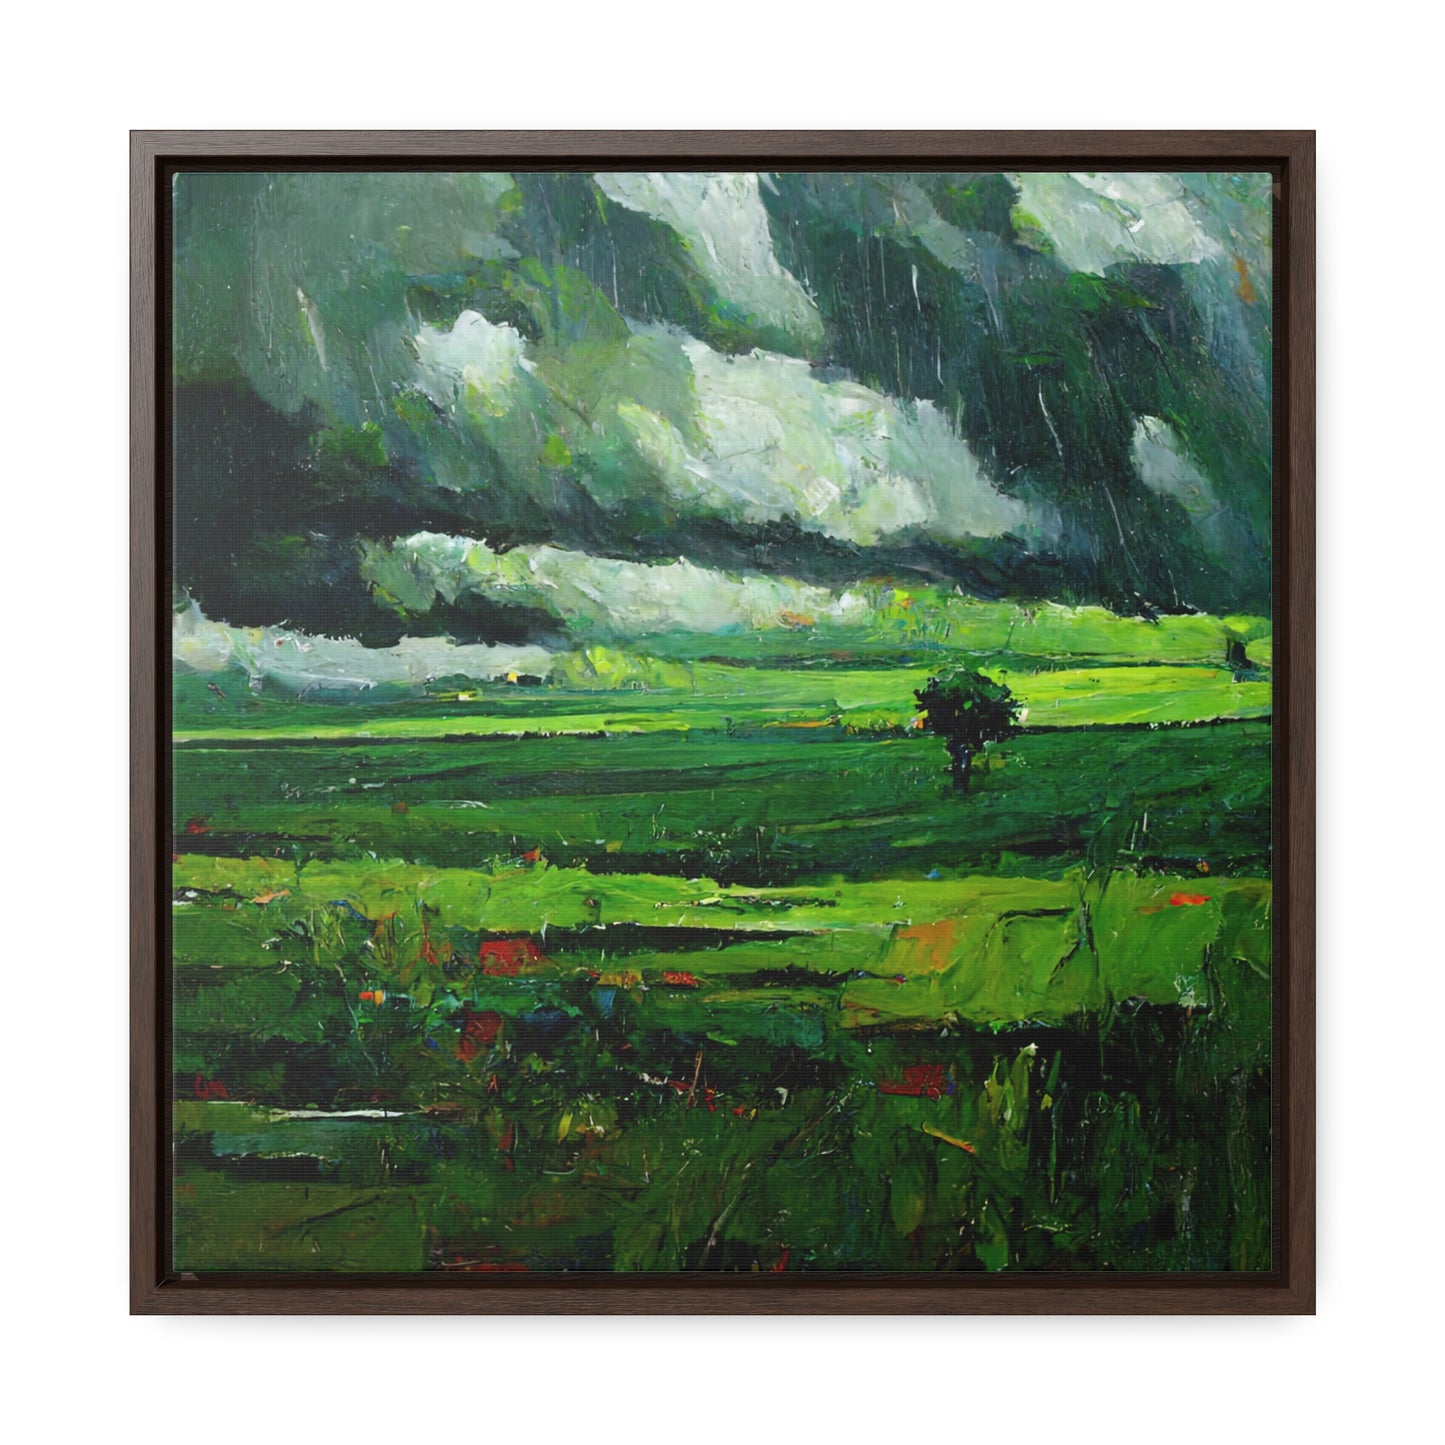 To the Rainy Land 6, Valentinii, Gallery Canvas Wraps, Square Frame